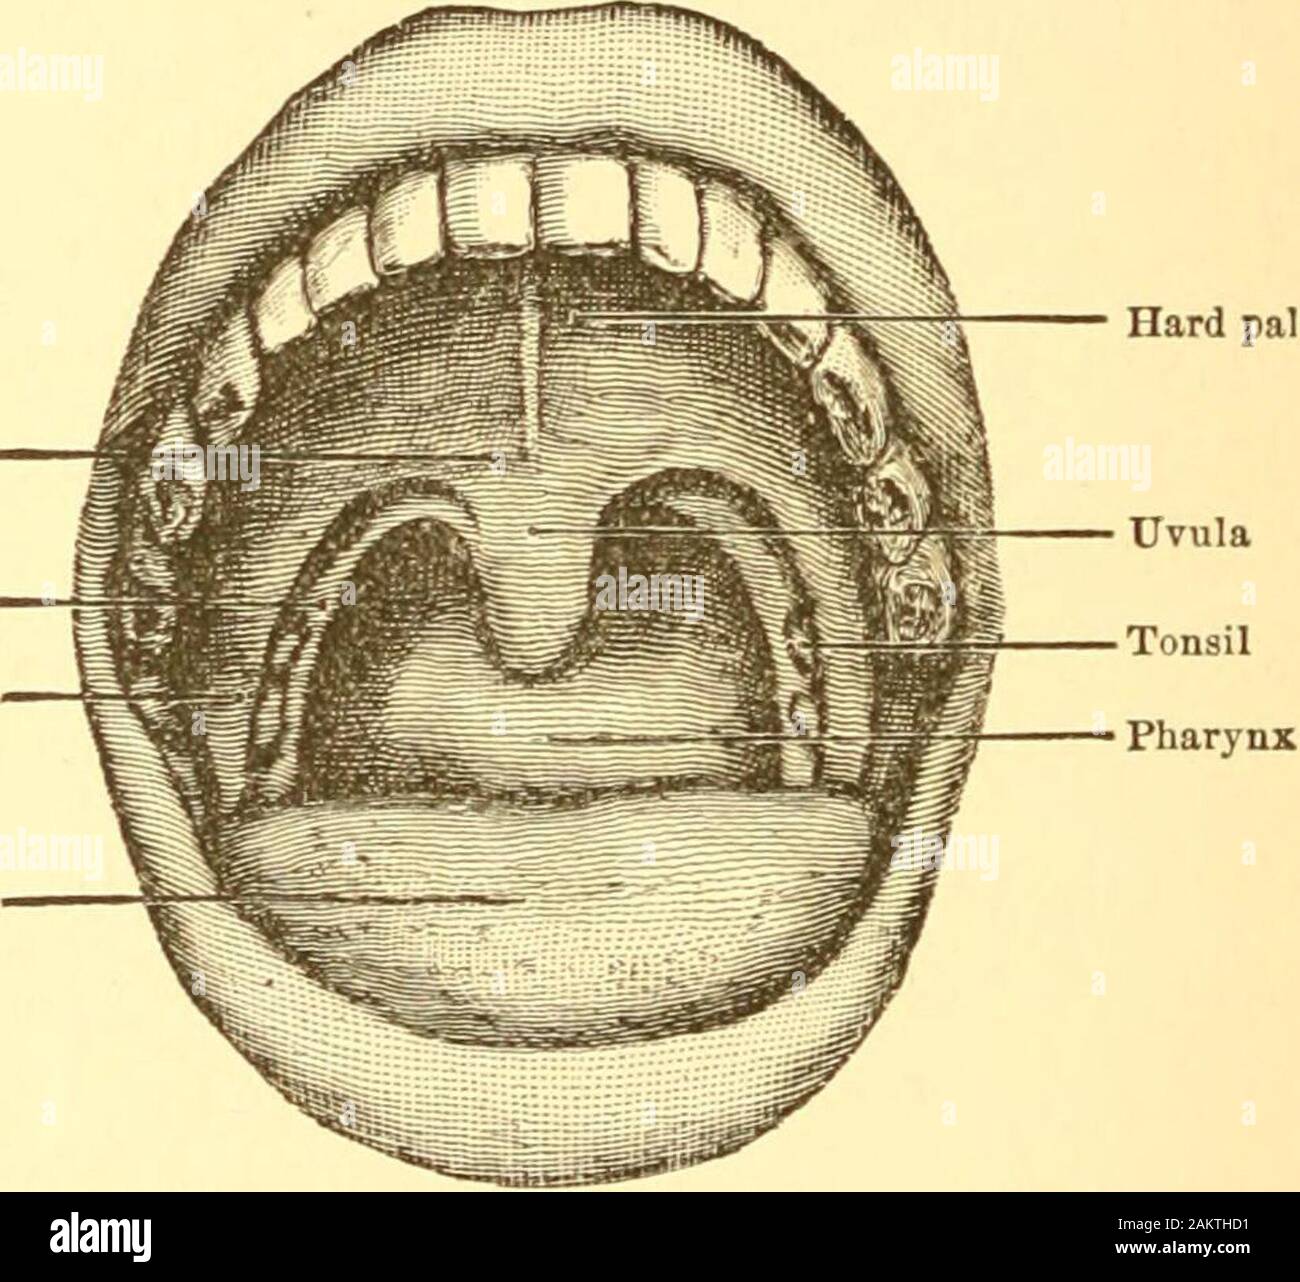 Diseases of the nose and throat; a text-book for students and practitioners . ally divides the faucial space into thearcades. This little appendage is covered with mucous mem-brane, and is composed of connective tissue, glands, and theposterior extremities of the two azygos uvulae muscles, which Hard palate Posterior half-archAnterior half-arch Tongue Fig. 56.—The Normal Palate and Pharynx. lie side by side in the median line of the soft palate. Theirfunctions are to elevate the uvula and aid the palato-pharyngeimuscles in separating the mouth and pharynx. The uvulaseems to aid in swallowing, Stock Photo